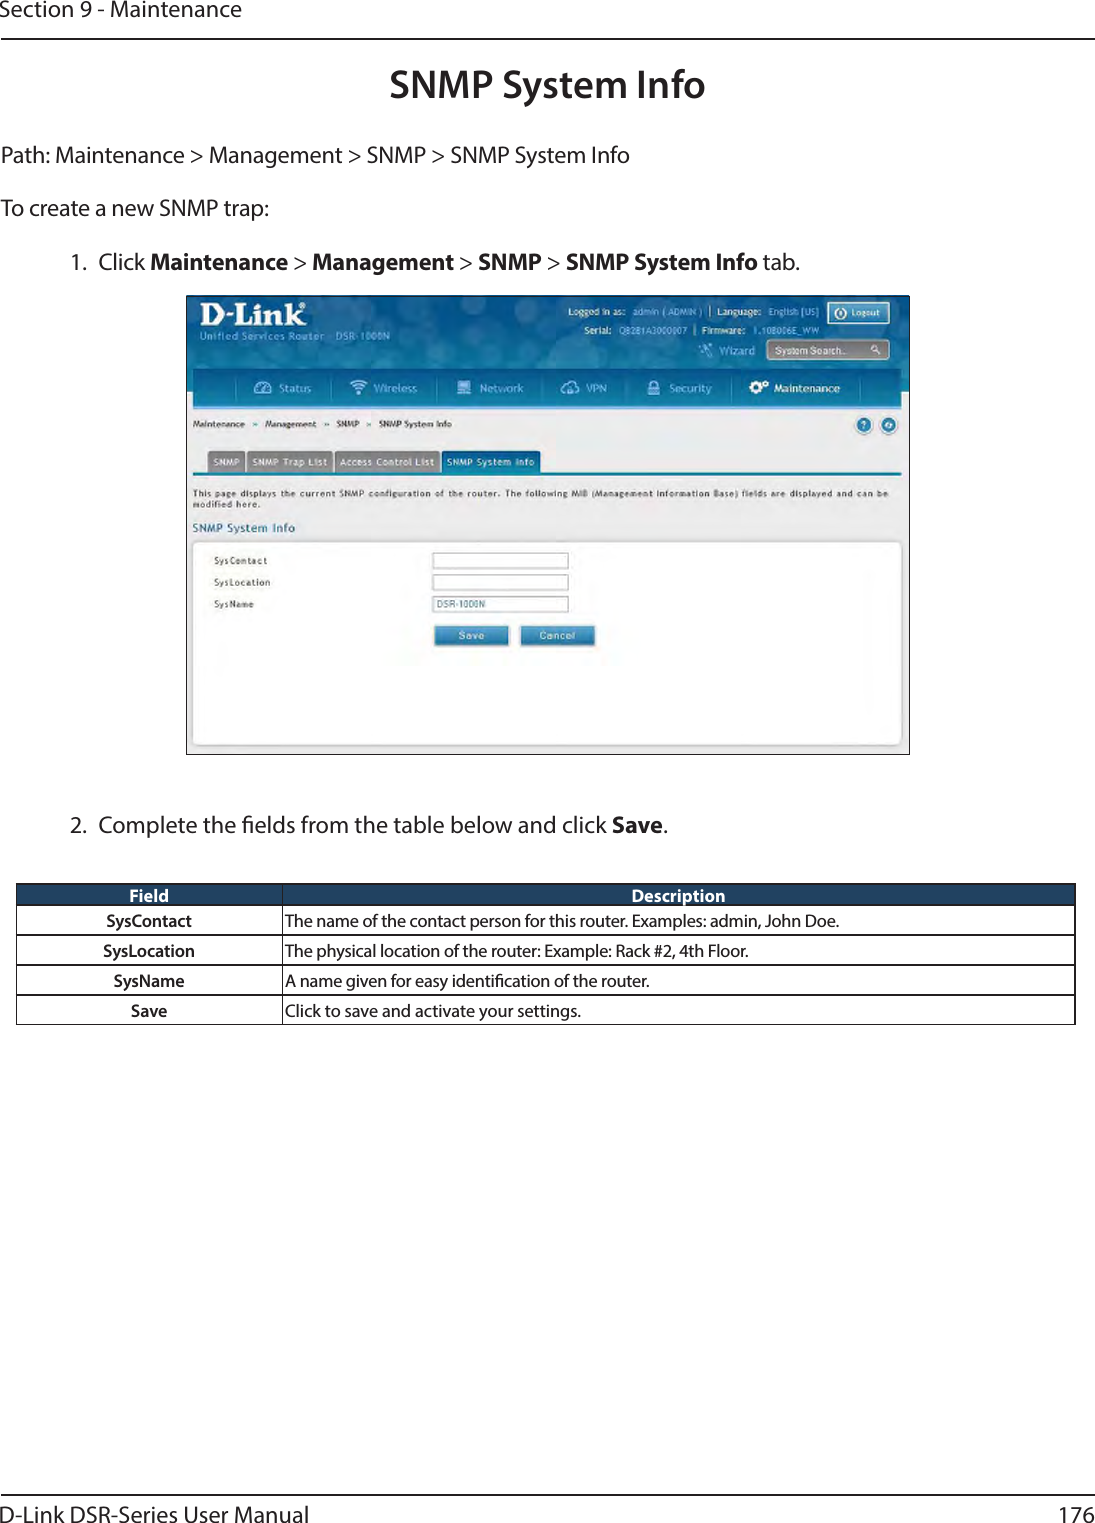 D-Link DSR-Series User Manual 176Section 9 - MaintenancePath: Maintenance &gt; Management &gt; SNMP &gt; SNMP System Info To create a new SNMP trap:1. Click Maintenance &gt; Management &gt; SNMP &gt; SNMP System Info tab.SNMP System Info2.  Complete the elds from the table below and click Save.Field DescriptionSysContact The name of the contact person for this router. Examples: admin, John Doe.SysLocation The physical location of the router: Example: Rack #2, 4th Floor.SysName A name given for easy identication of the router.Save Click to save and activate your settings.